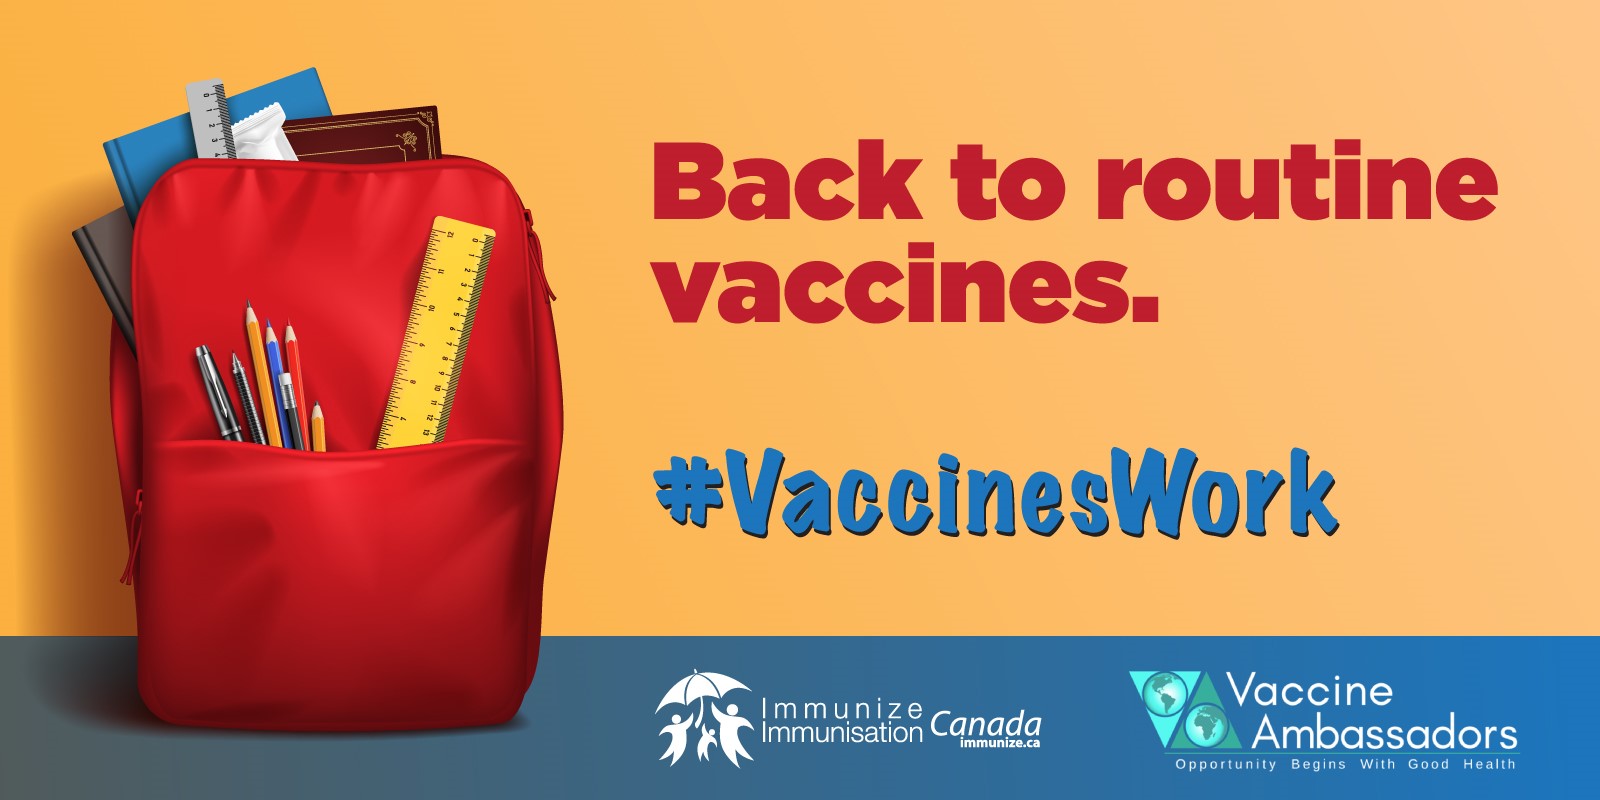 Back to routine vaccines. Vaccines work.